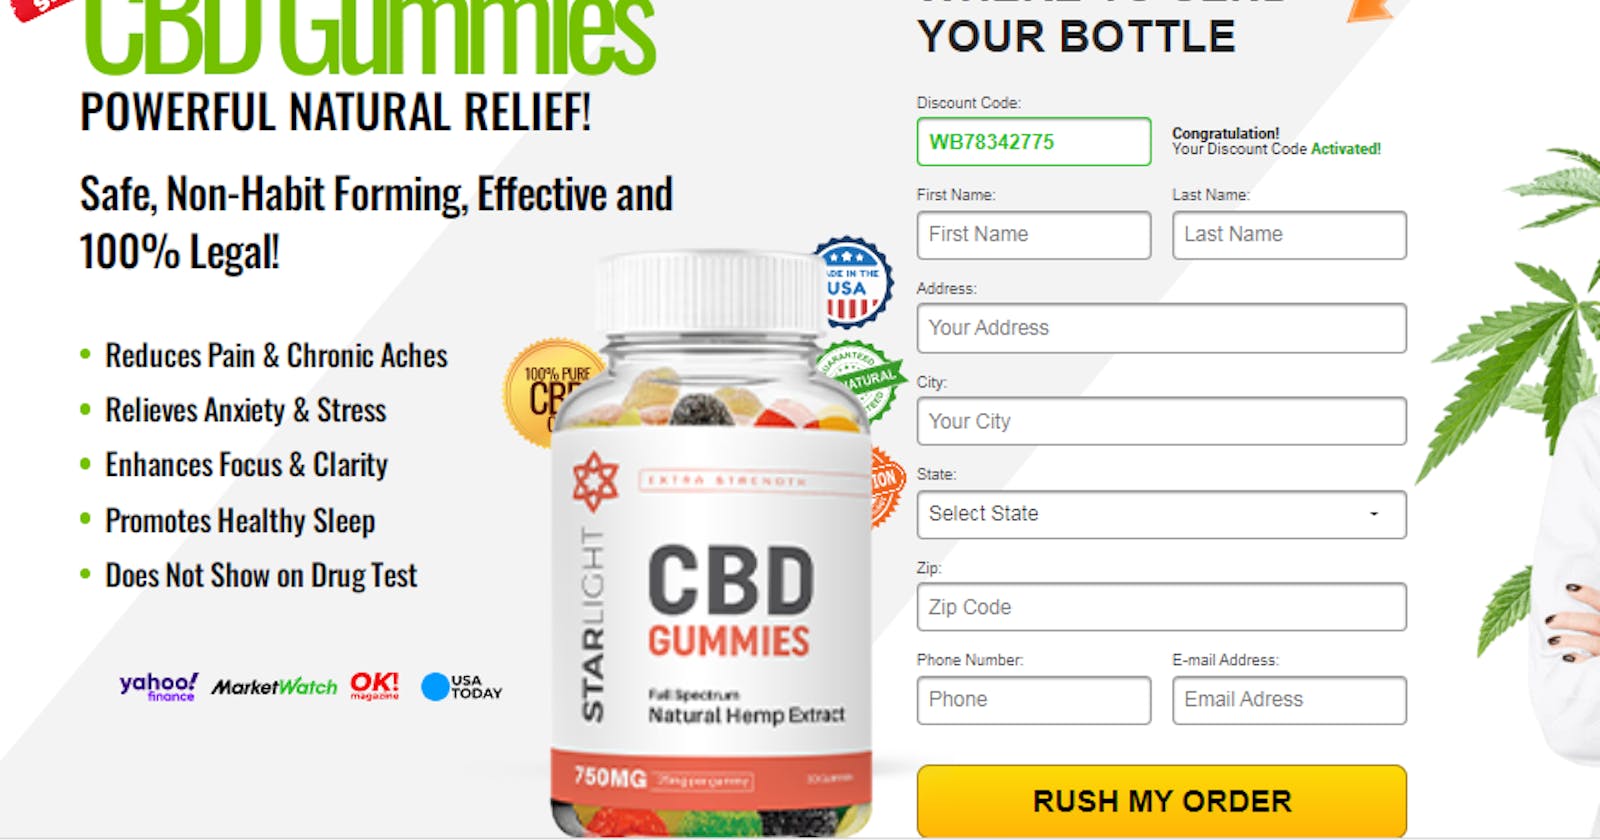 Starlight CBD Gummies (Review) Critical Details Exposed !Shocking Scam Review (Scam or Legit) Worth Buying Do They Work? Scam or Safe?